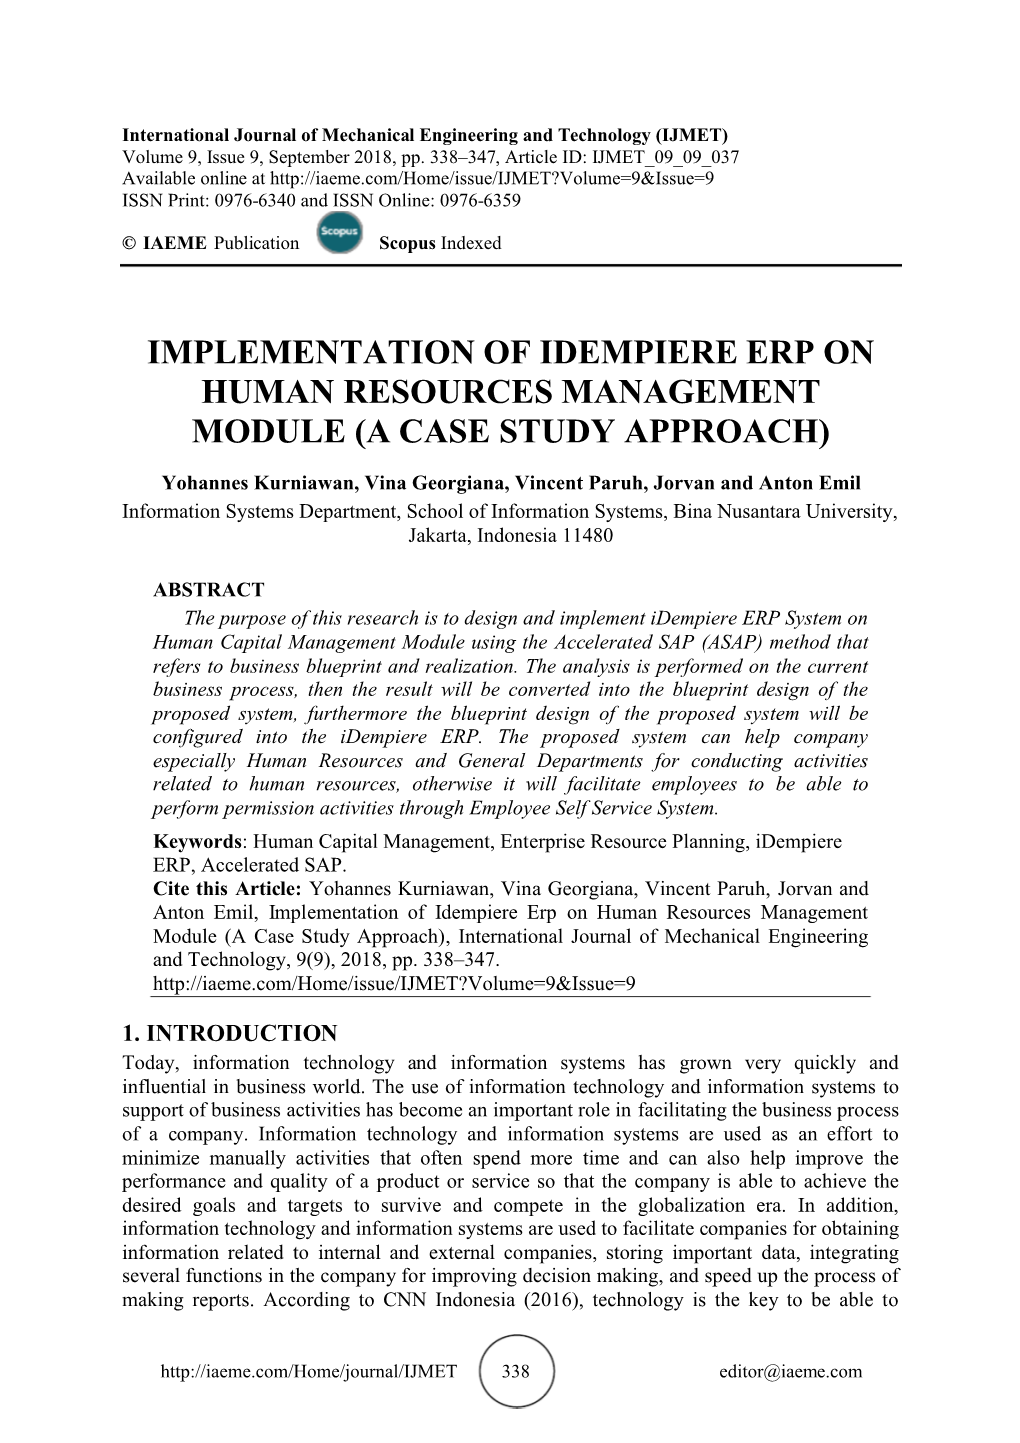 Implementation of Idempiere Erp on Human Resources Management Module (A Case Study Approach)